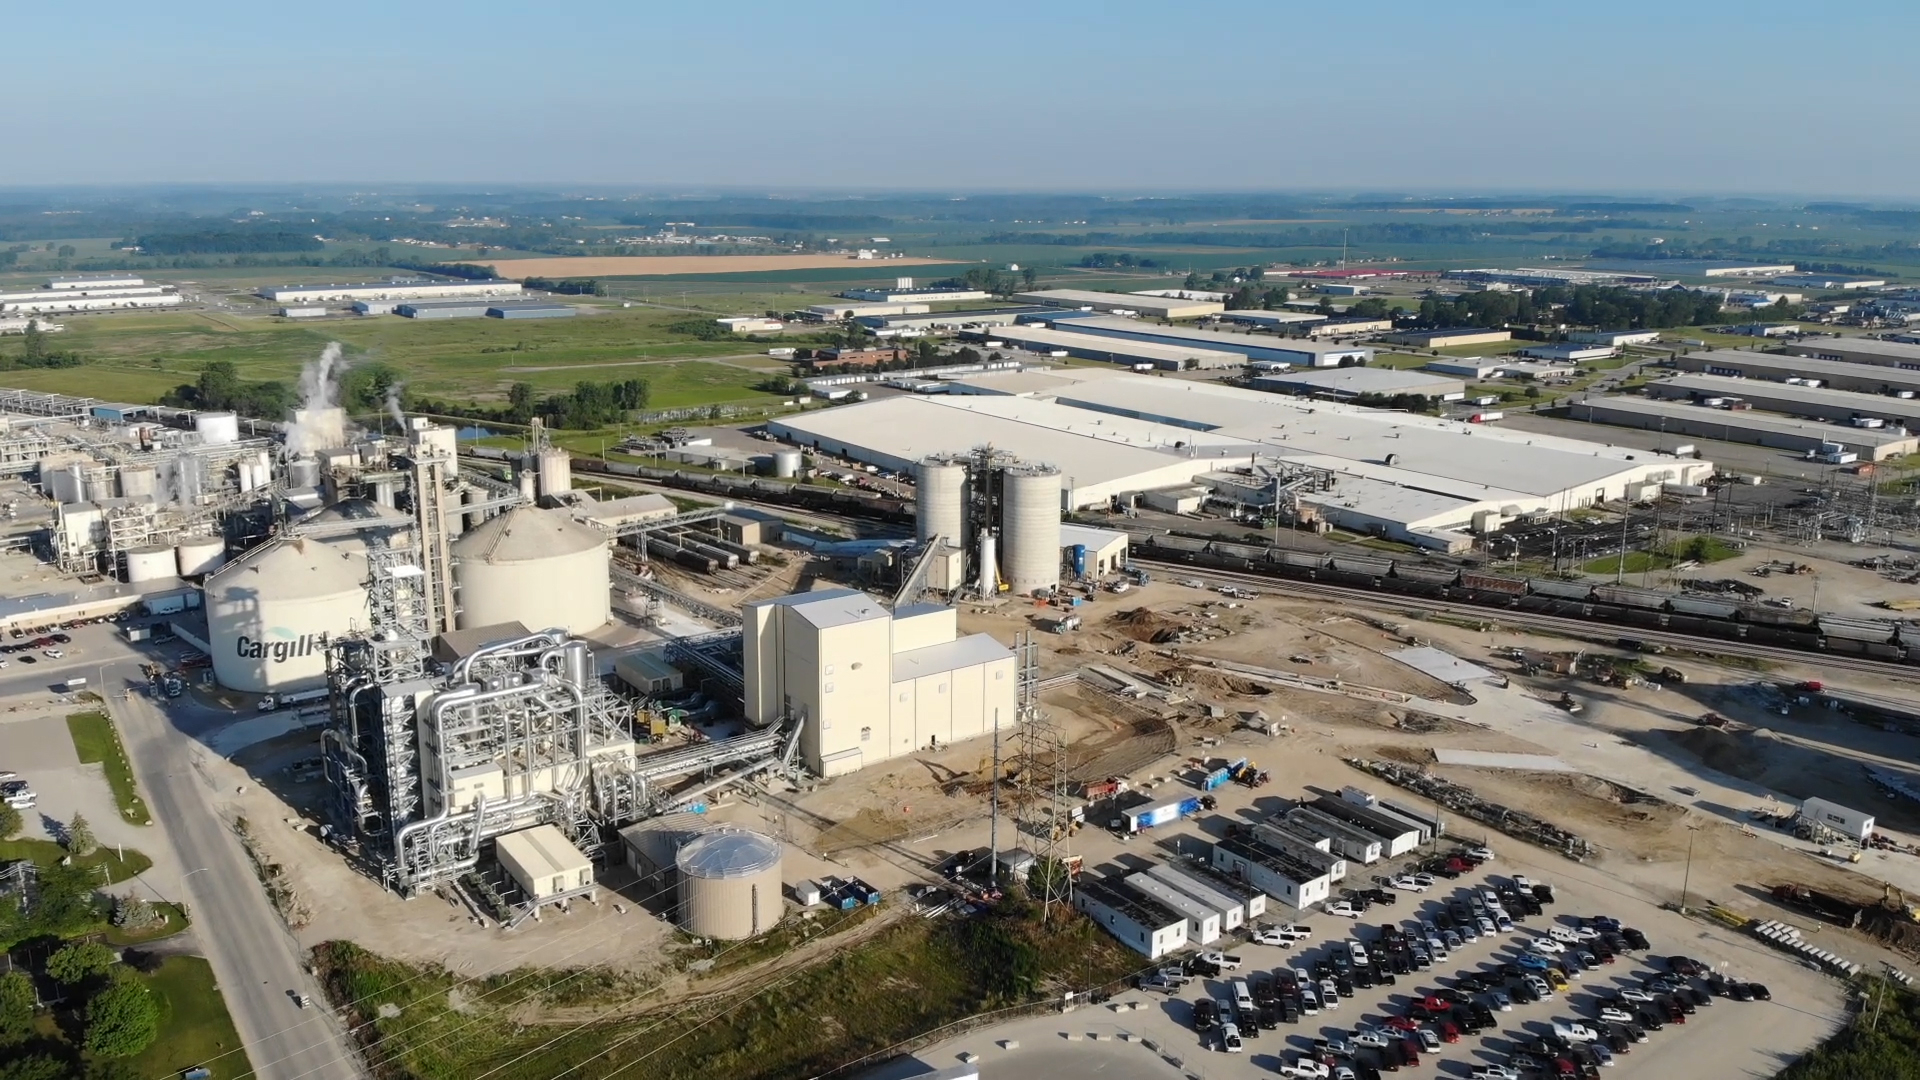 Cargill's newly expanded soybean processing plant in Sidney, Ohio helps meets increased demand for soy products